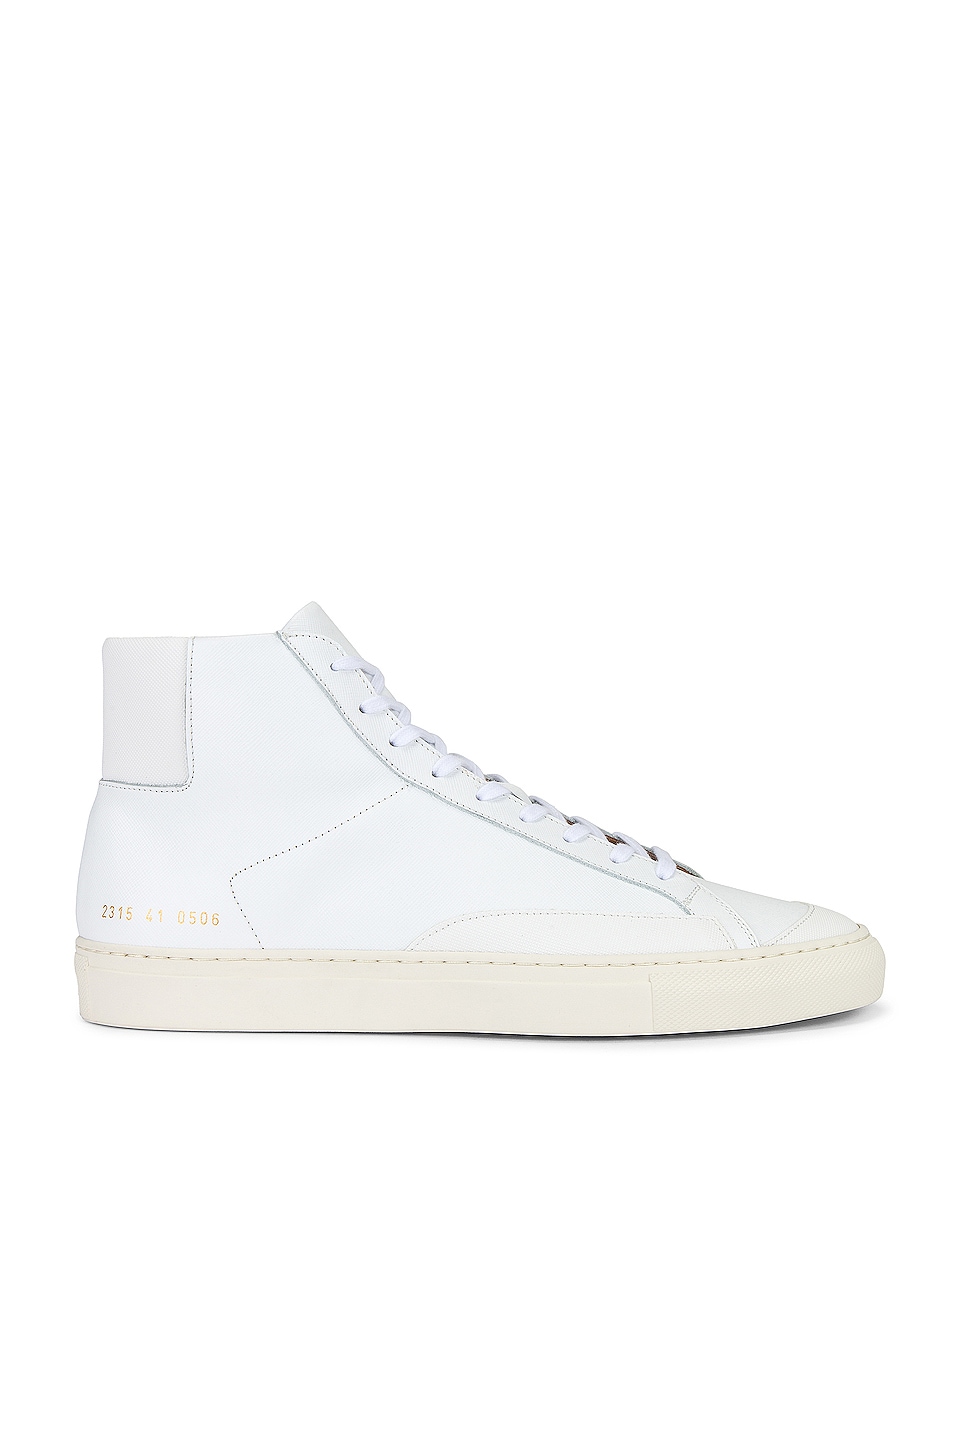 Common Projects Achilles High White